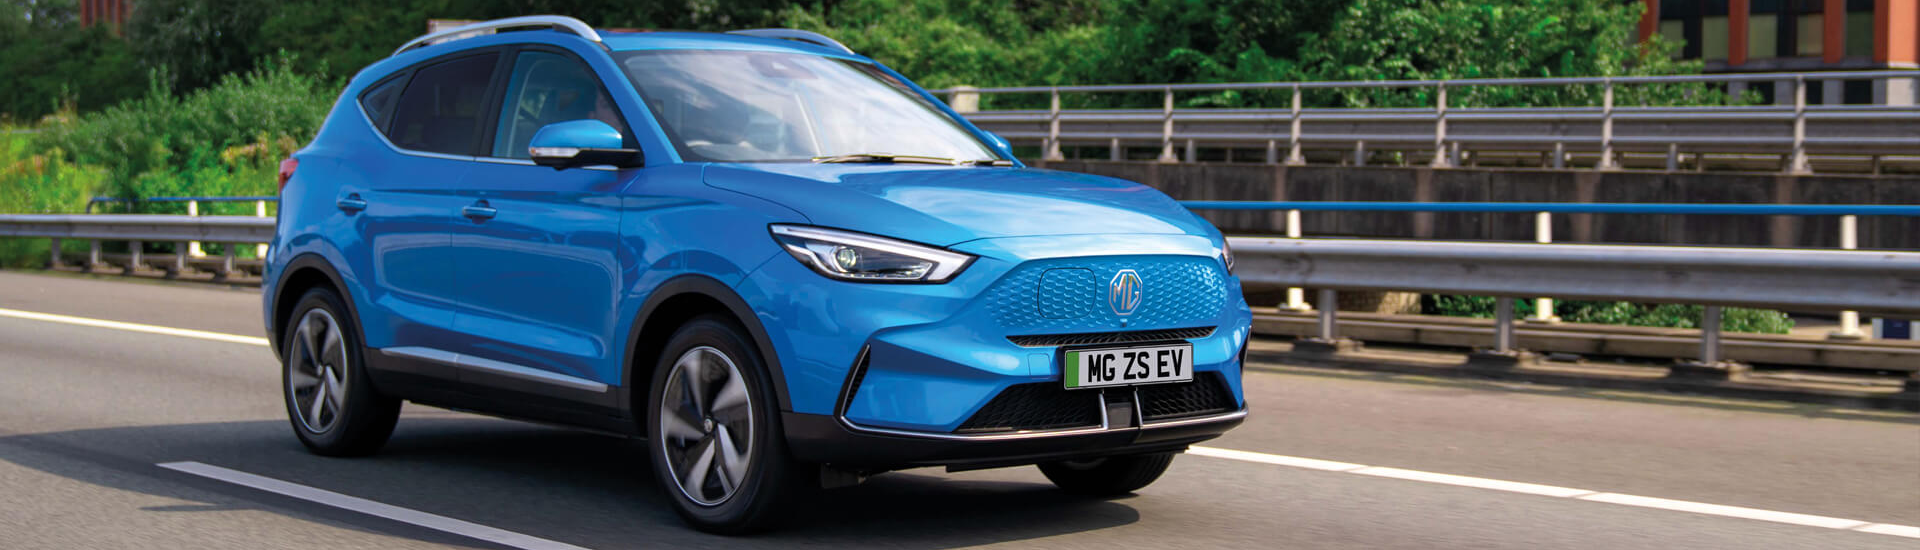 All-New MG New Car Offers